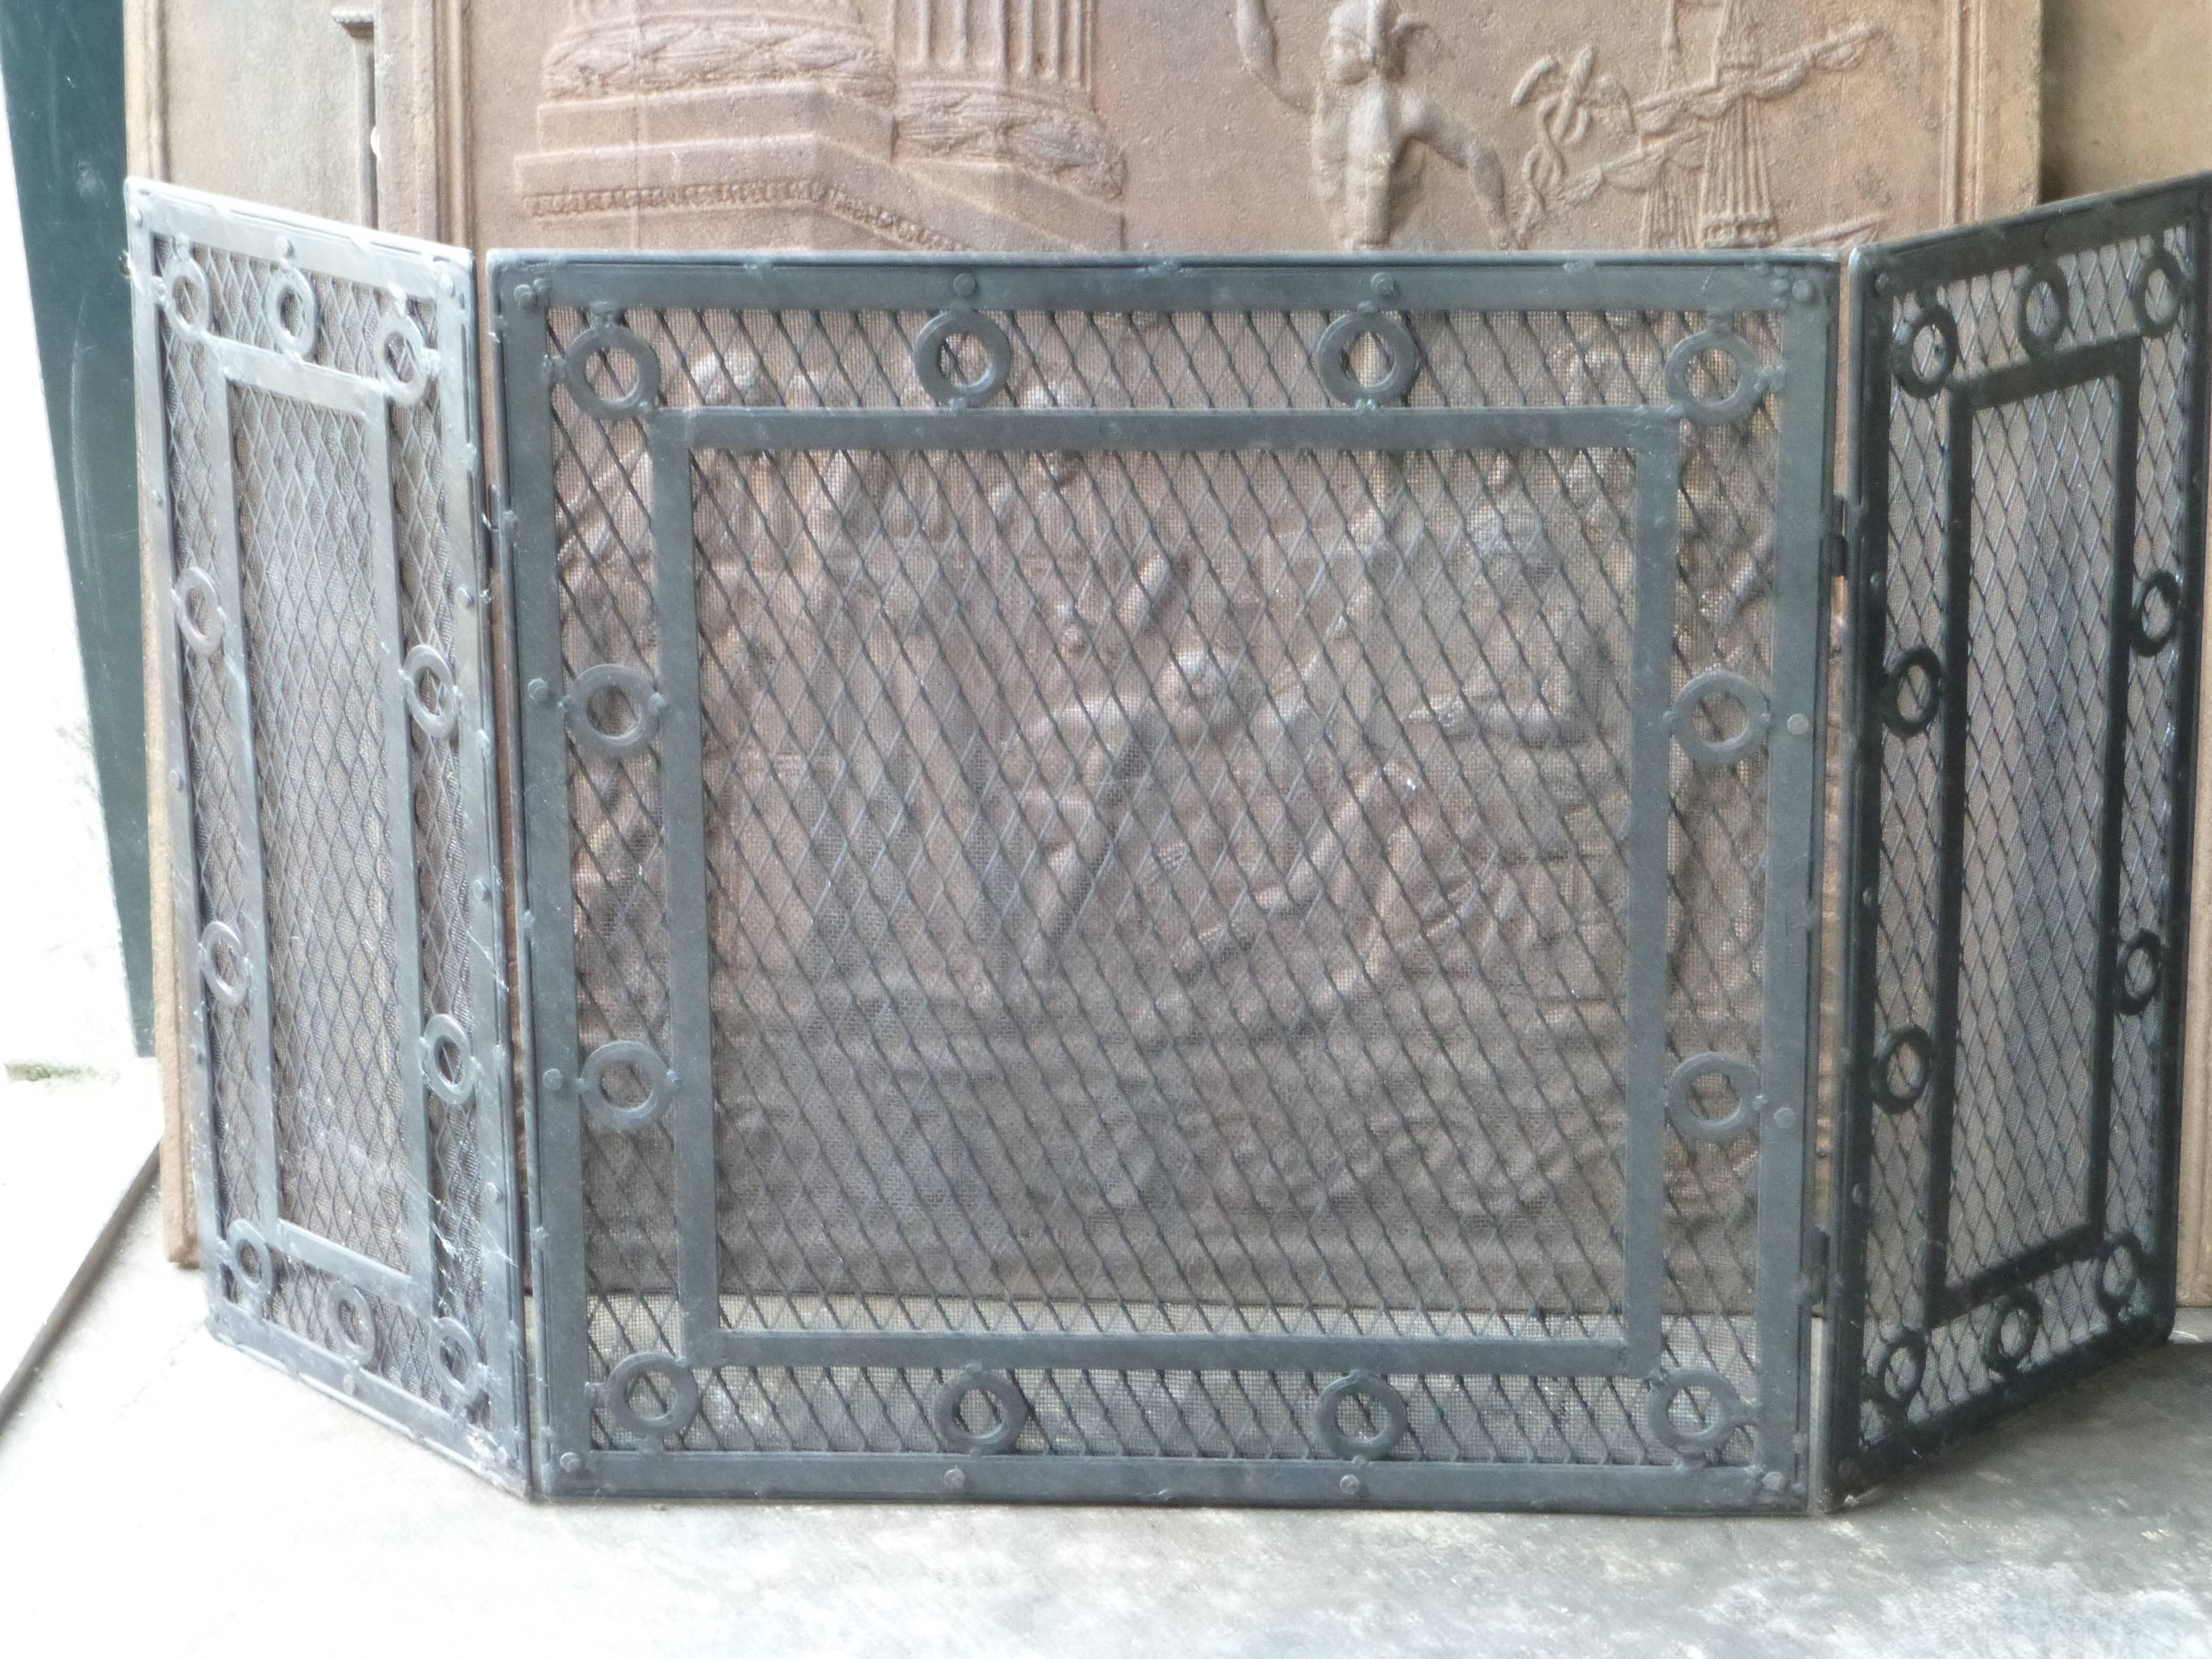 We always have 50+ antique fire screens - fireplace screens in stock that can be ordered on line. See our website for our current stock and prices.